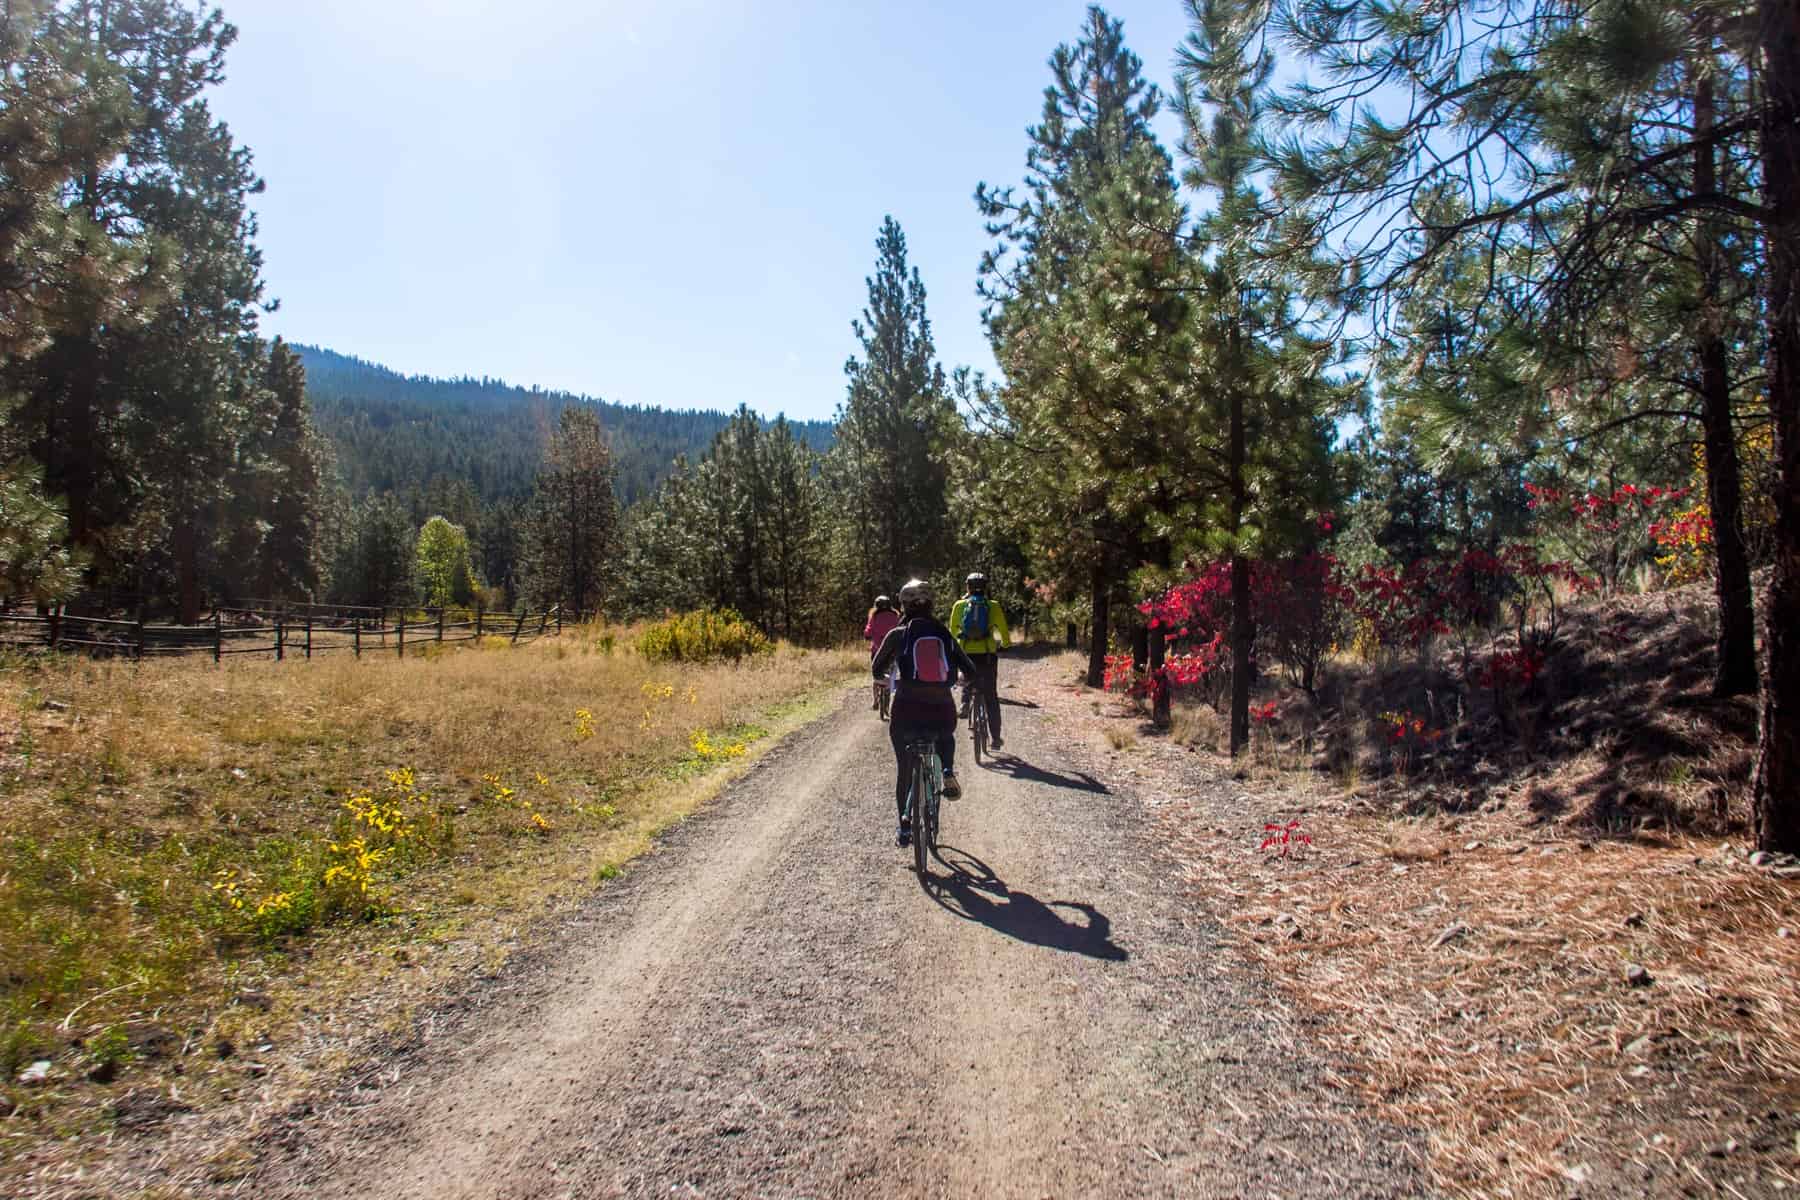 Cyclists on a flat gravel path passing through a forest with autumnal colours – part of the easy-grade route of the Kettle Valley Bike Trail.